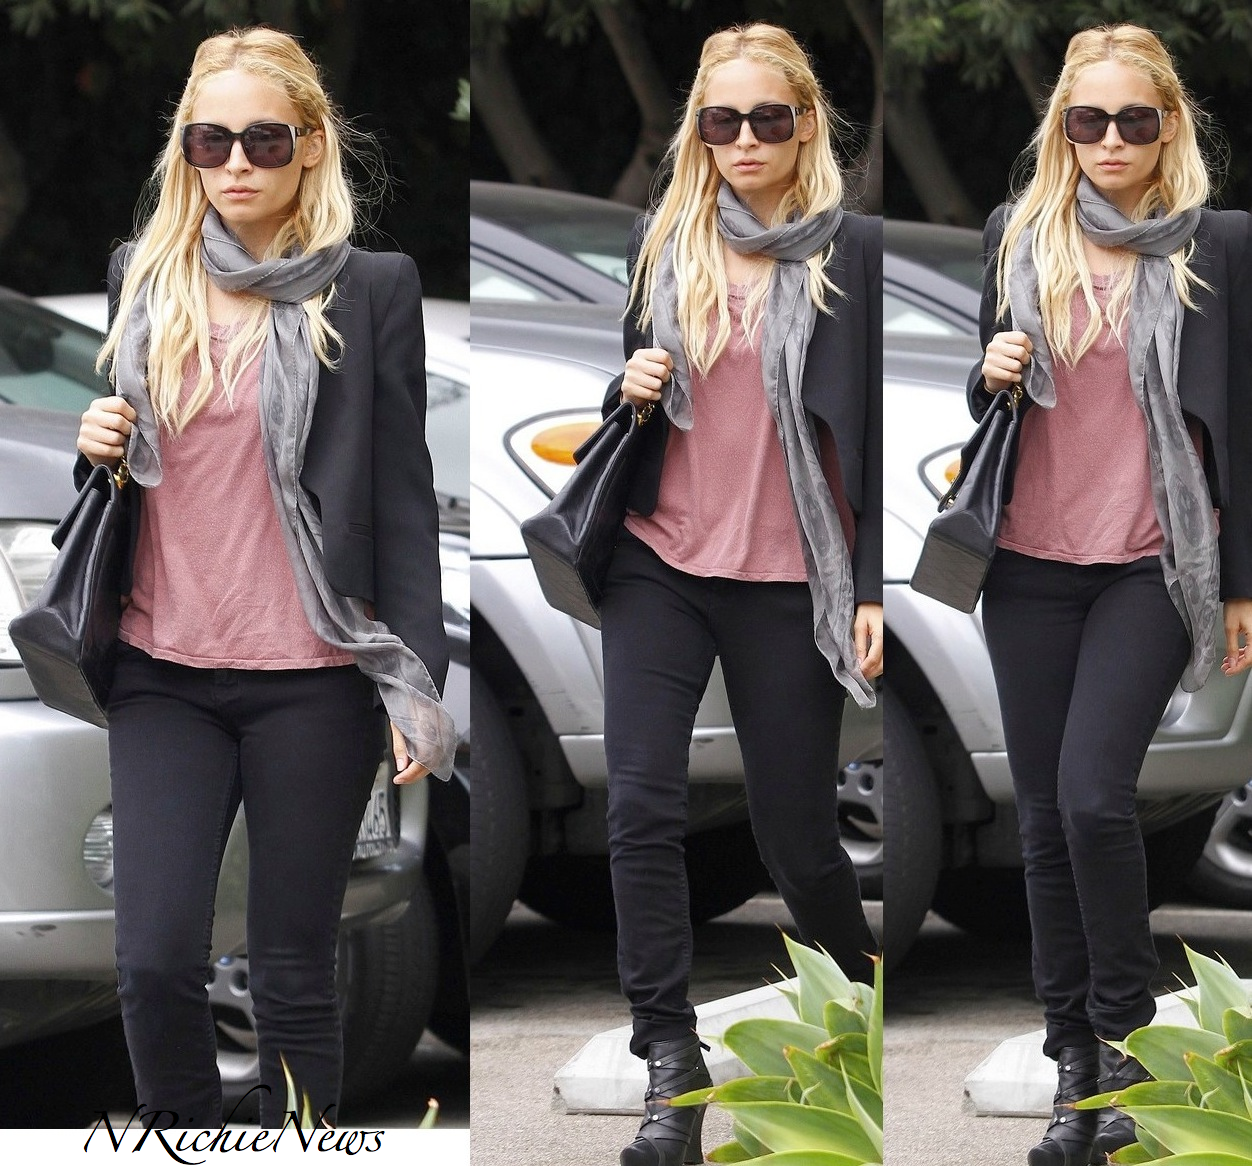 NICOLE RICHIE NEWS: SPOTTED: Nicole Richie out in West Hollywood